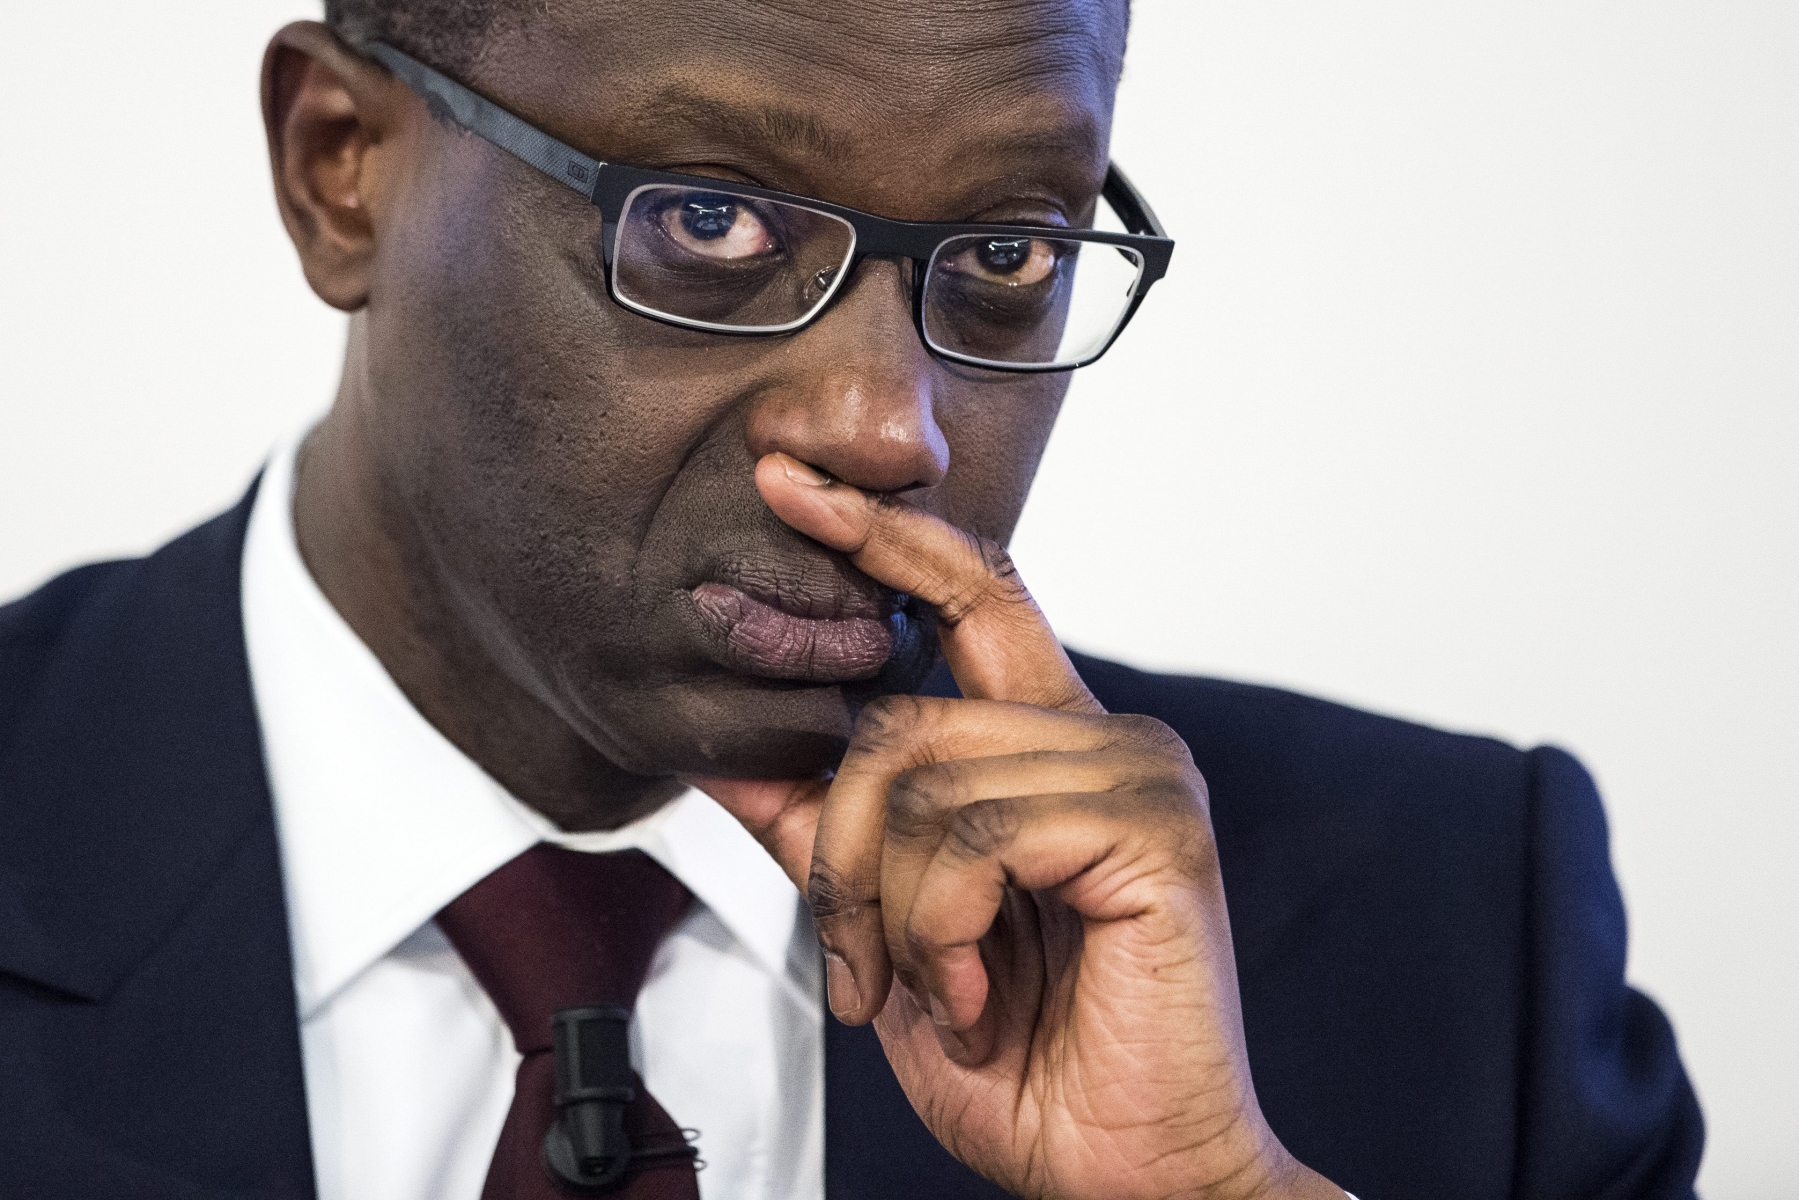 Tidjane Thiam, CEO of Swiss bank Credit Suisse, is pictured during a press conference in Zurich, Switzerland, Thursday, 23 July 2015. Swiss bank Credit Suisse said that net income was 1.05 billion Swiss francs ($1.09 billion) in the quarter, compared with a loss of 700 million francs in the same period last year. (KEYSTONE/Ennio Leanza)  SWITZERLAND CREDIT SUISSE QUARTER RESULTS